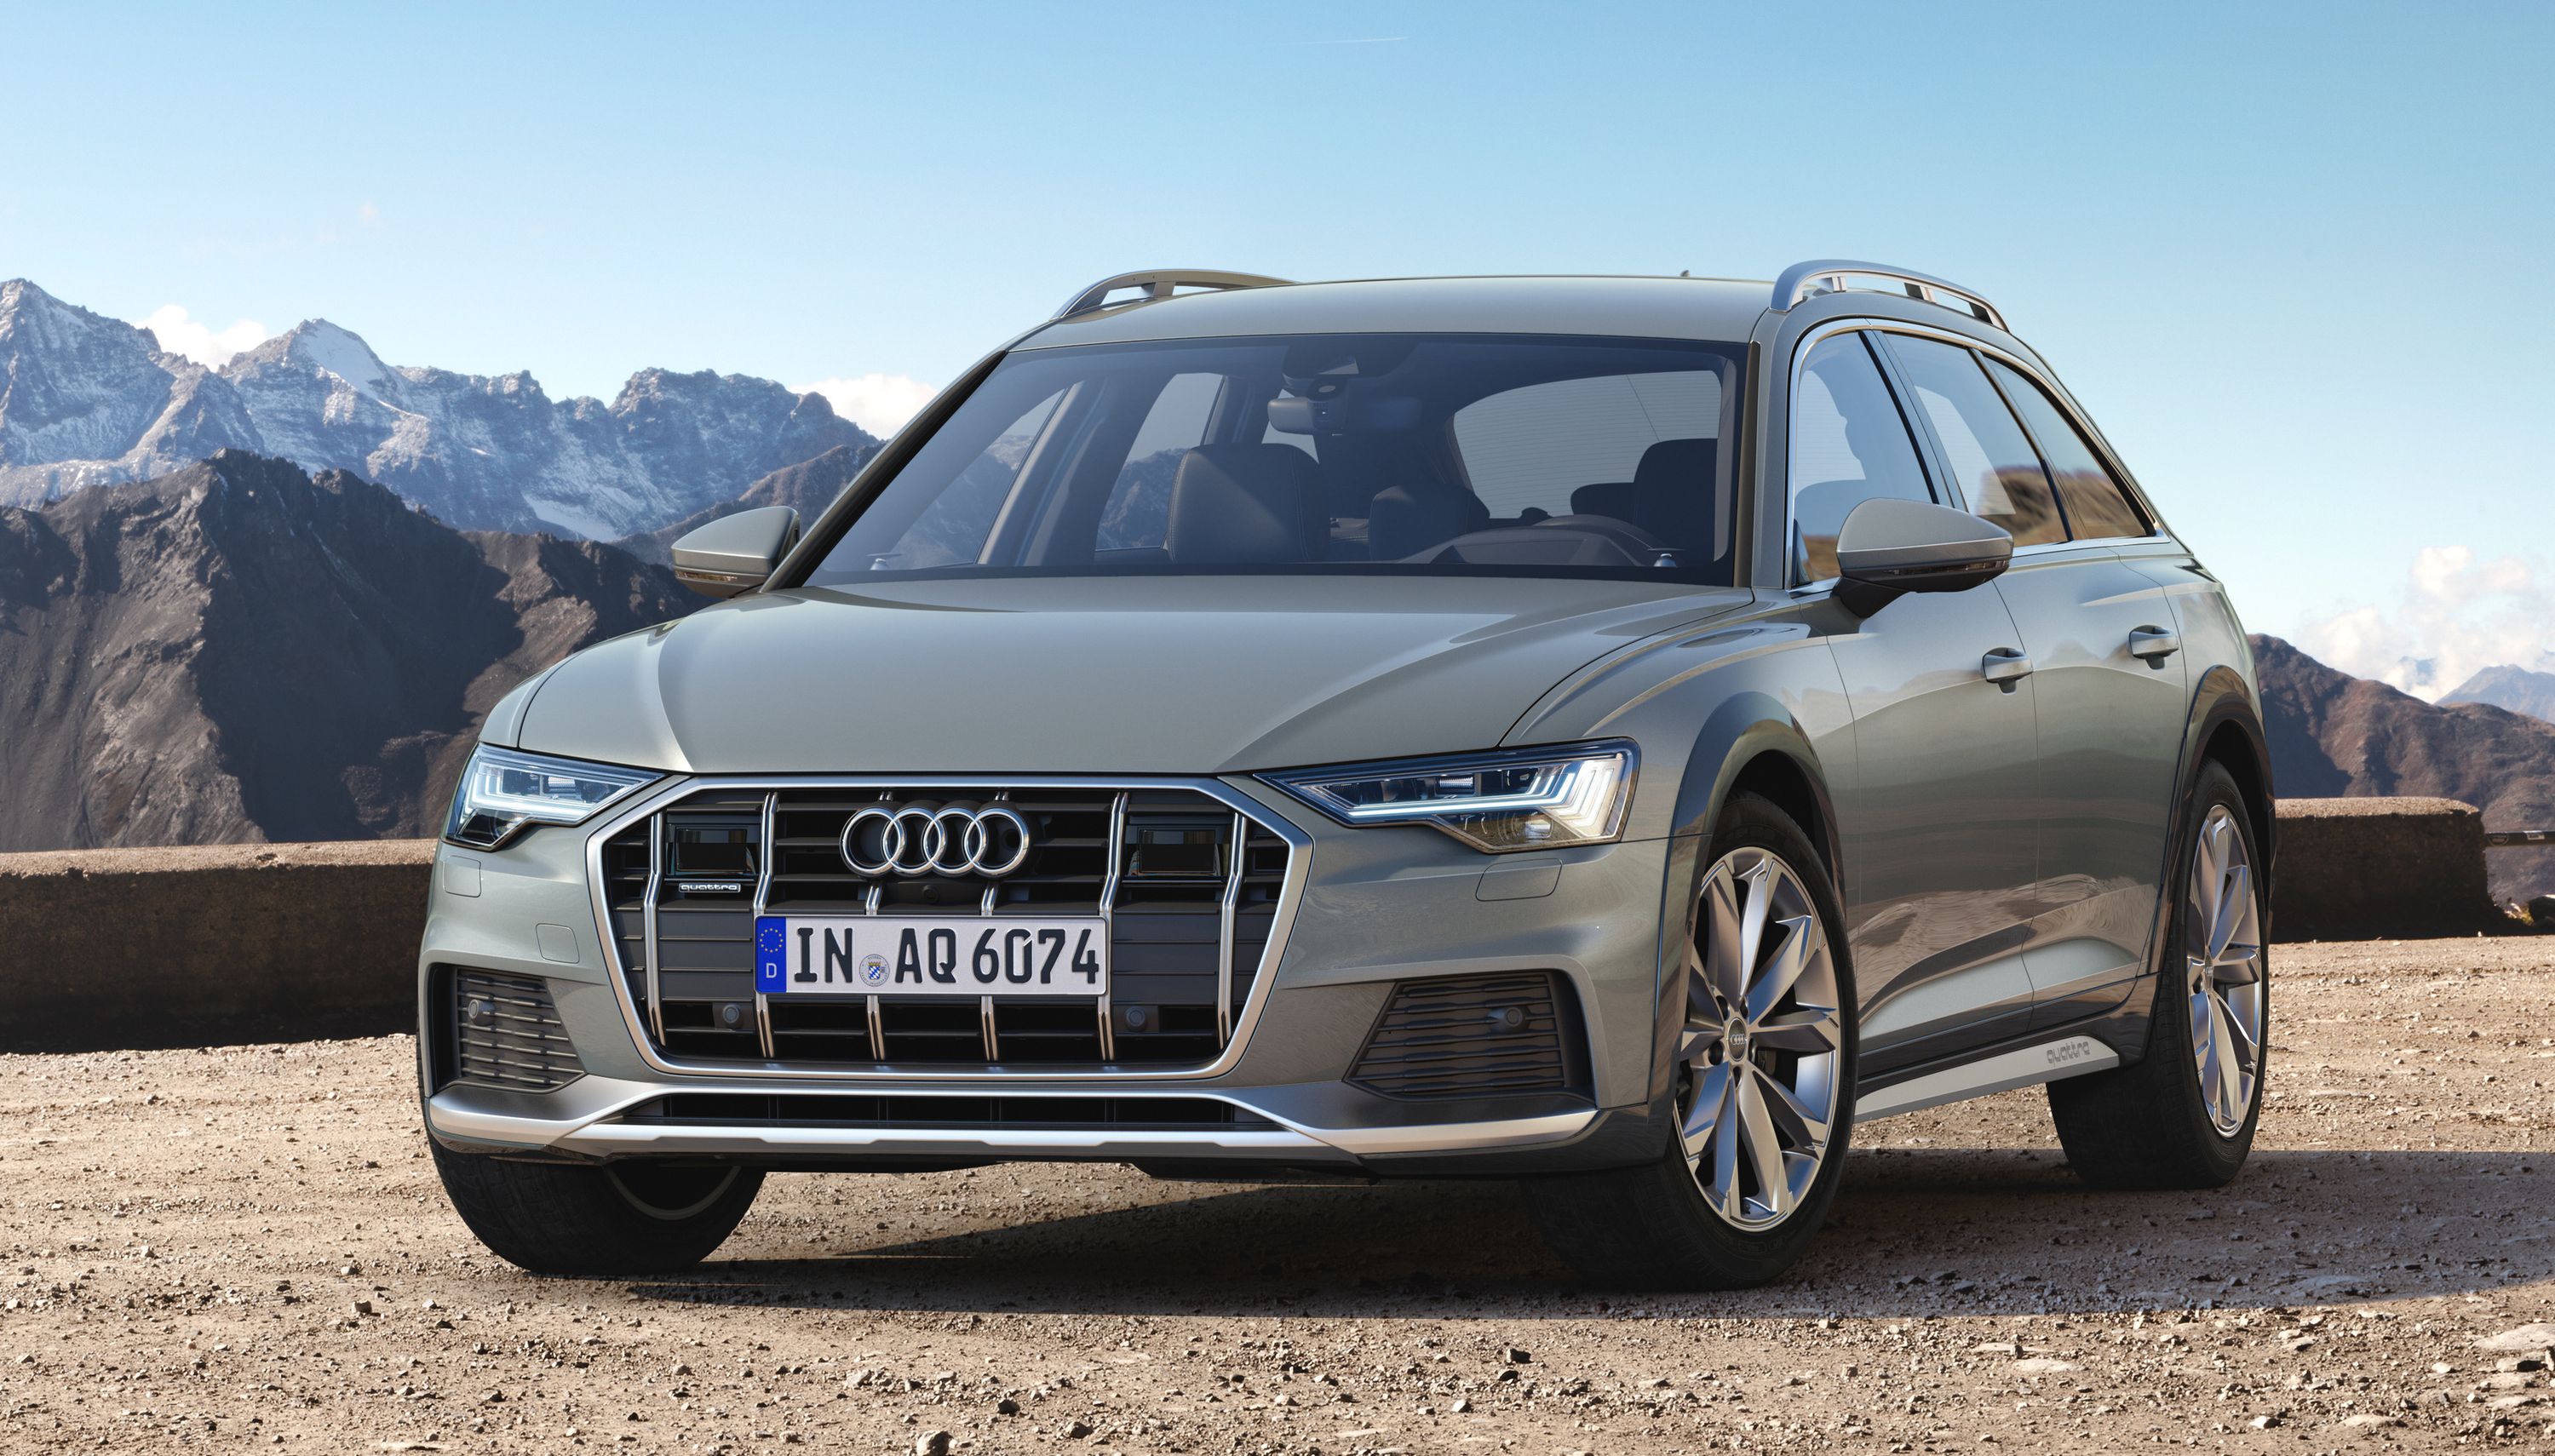 Audi A6: Which Should You Buy, 2020 or 2021?